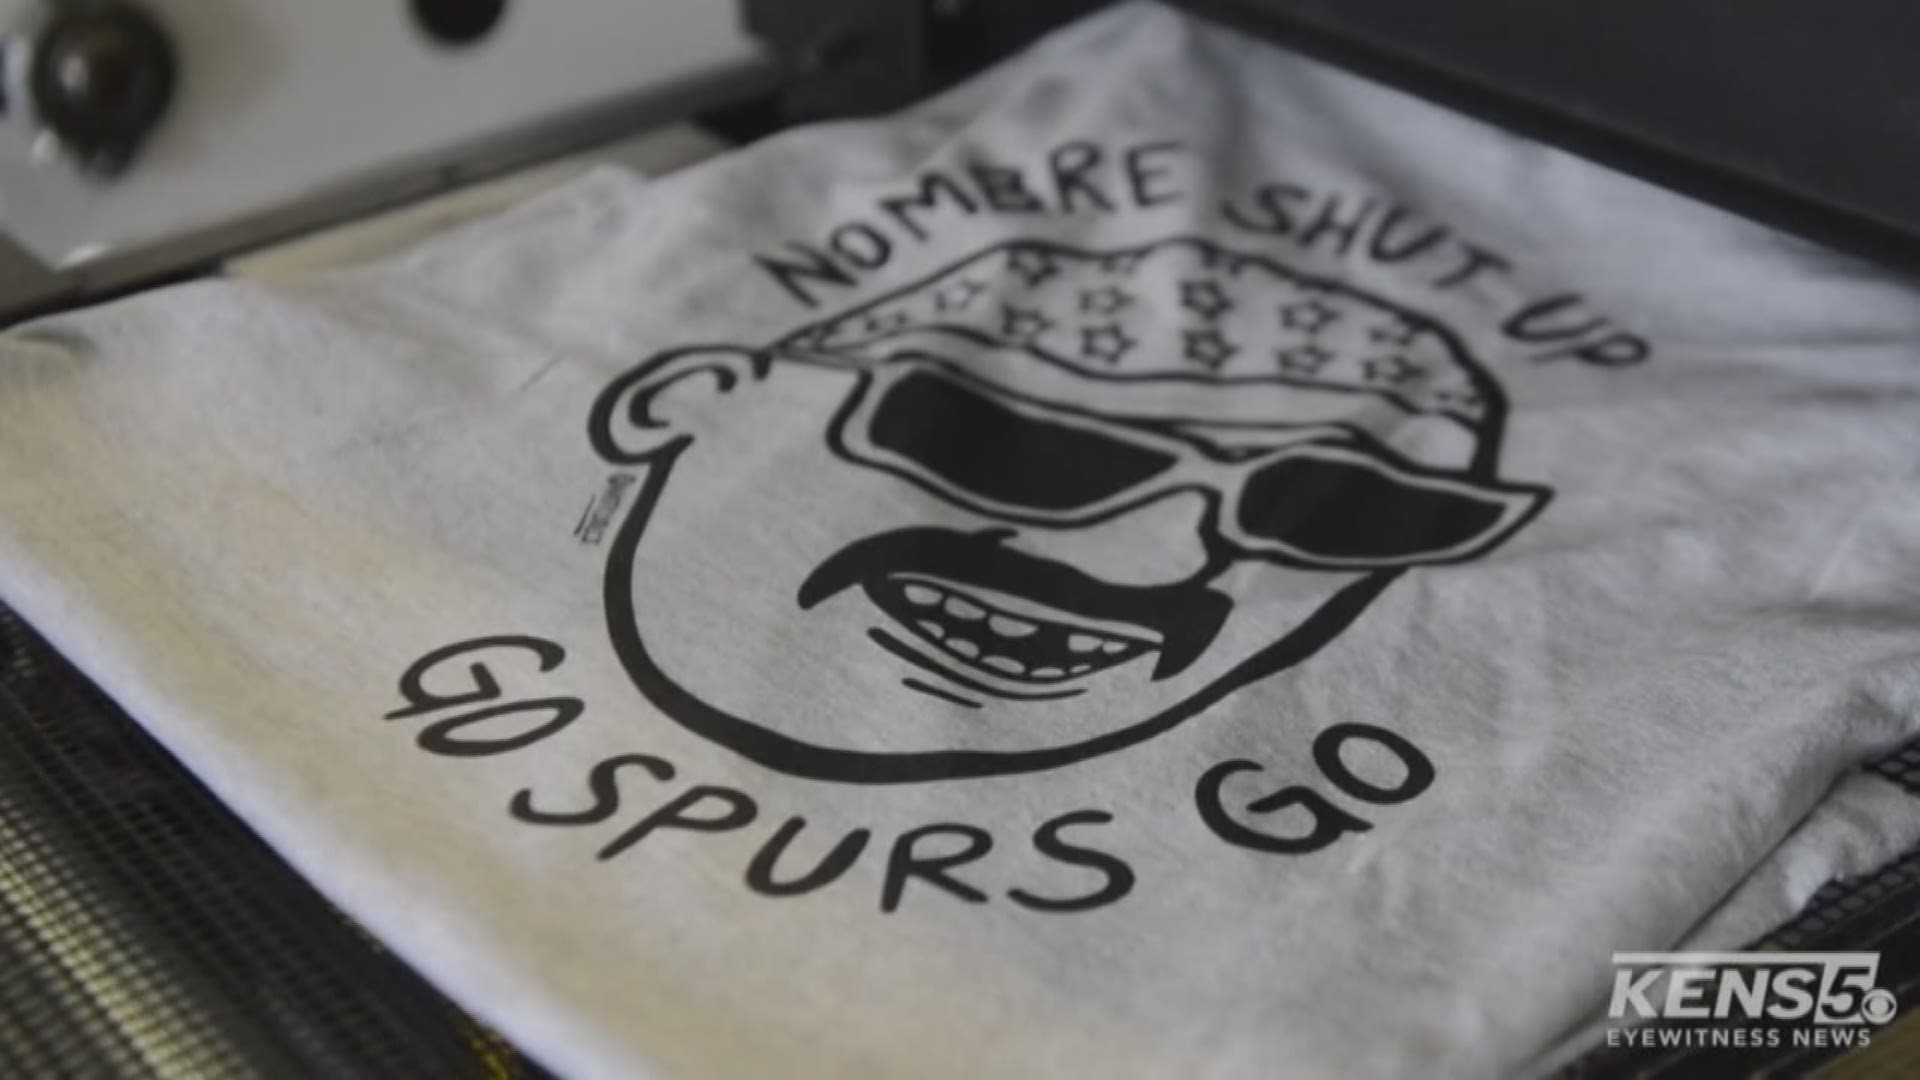 One man's viral response has inspired a community to embrace a different kind of Spurs fandom.